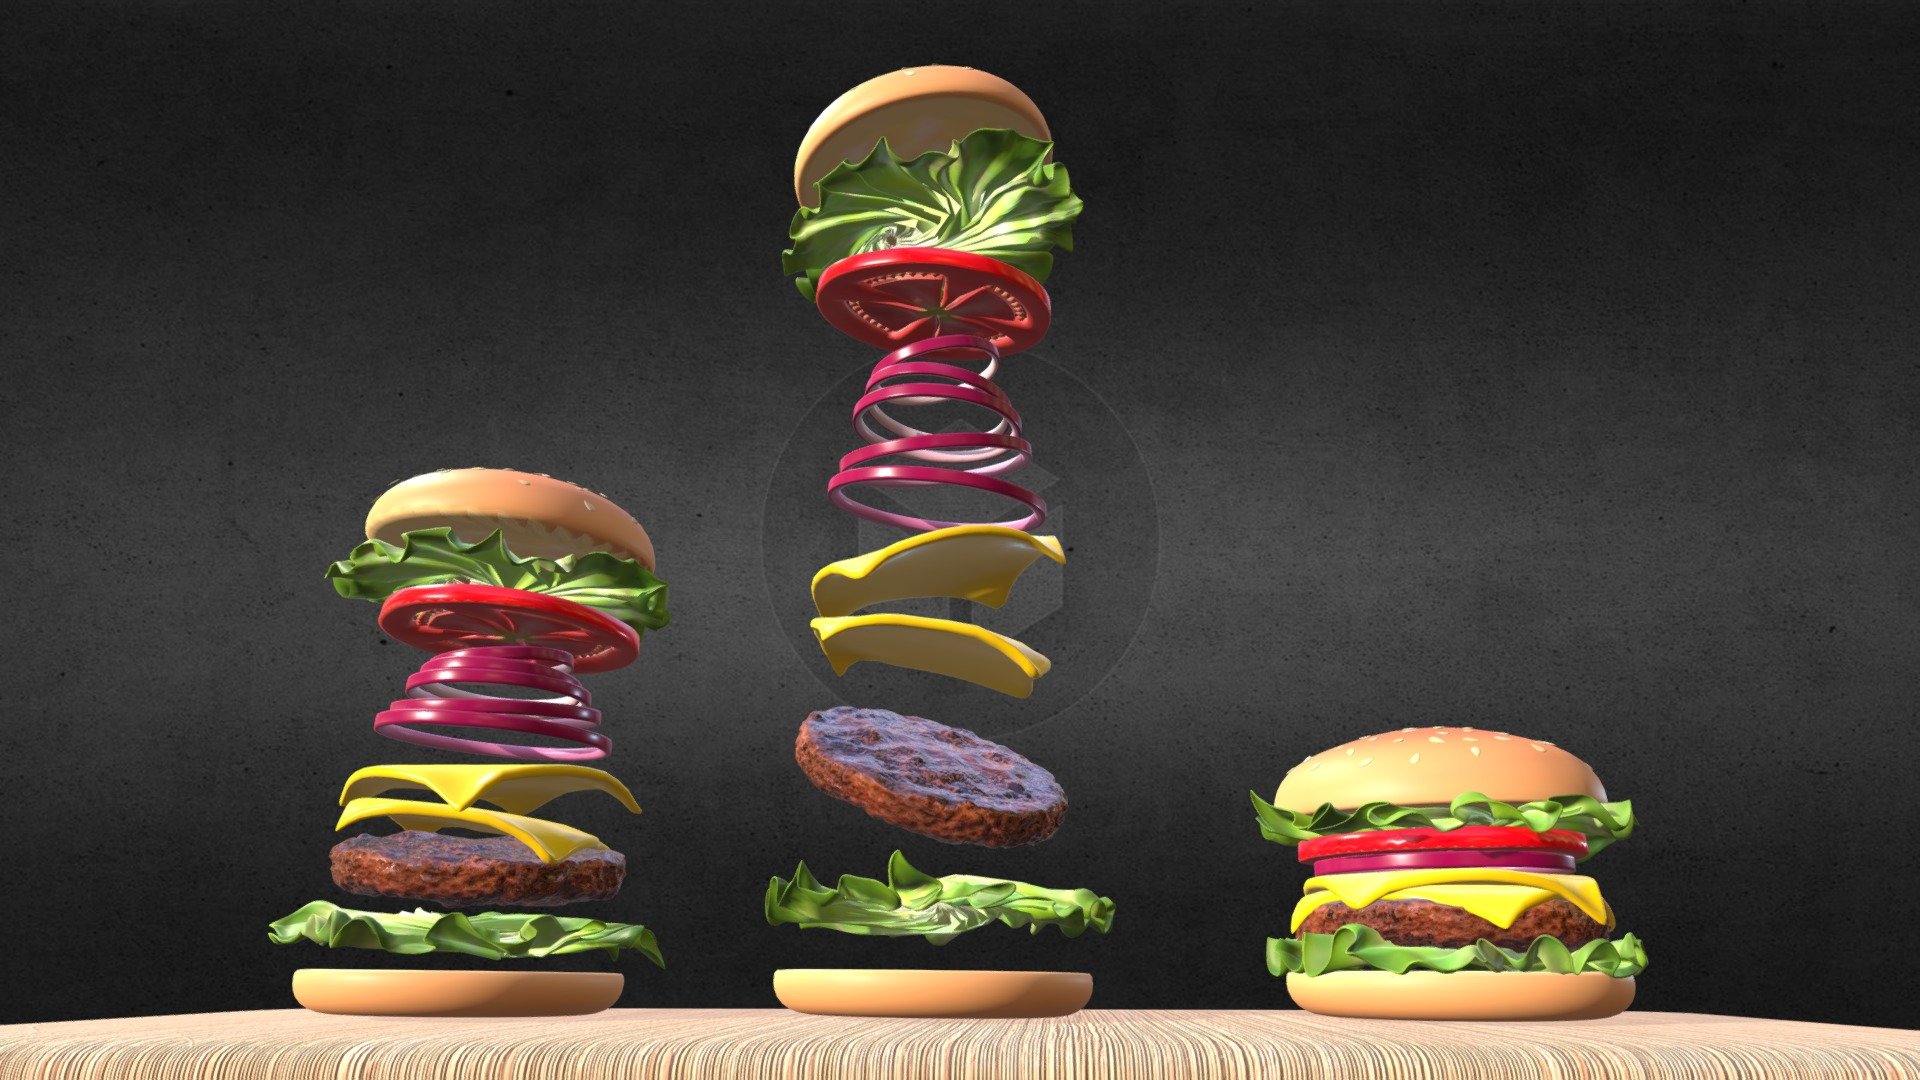 Three different poses of cheeseburger sandwich.
The burger is topped with cheese, lettuce, tomato and onion 3d model